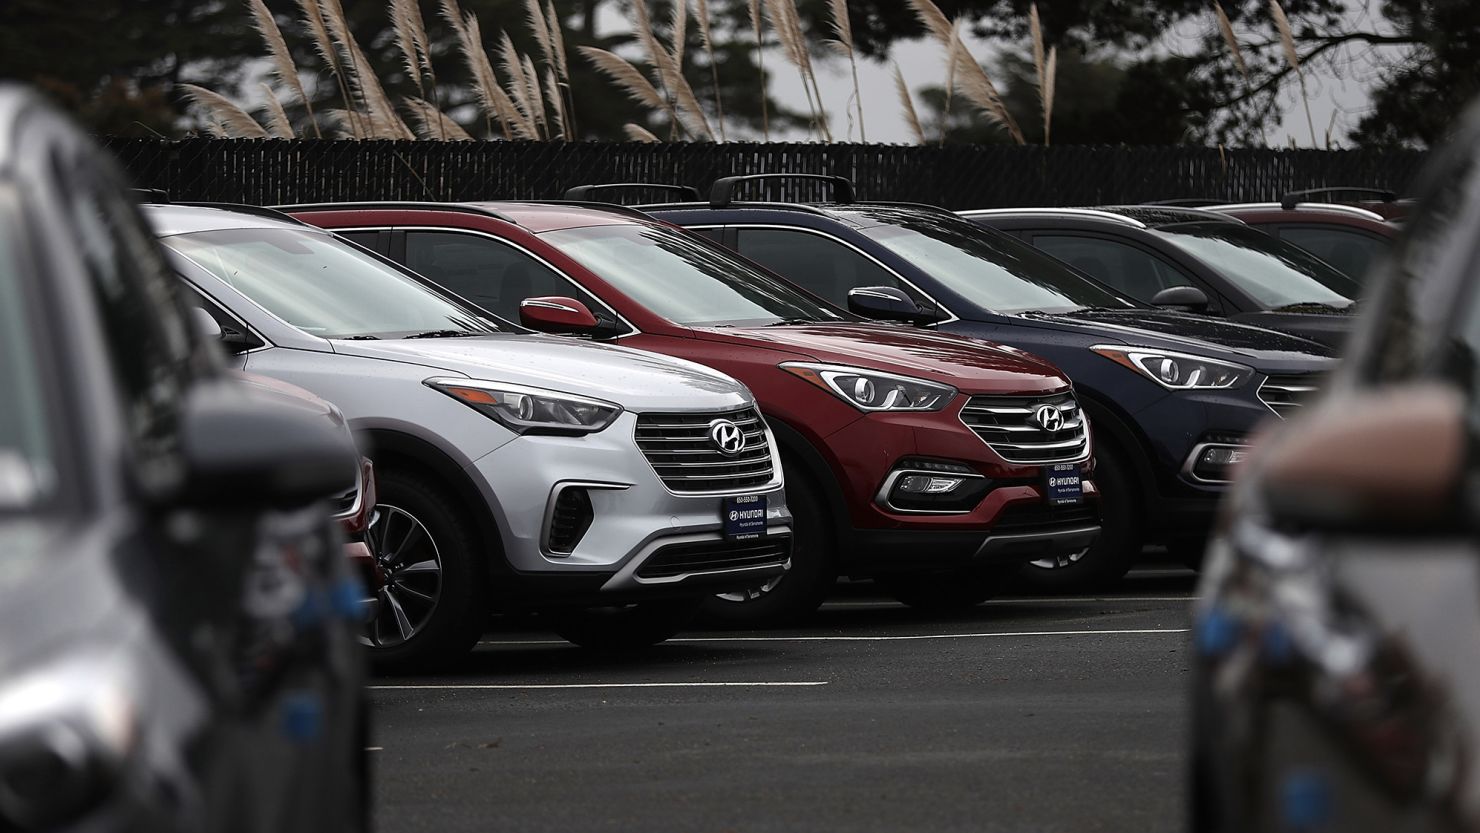 Why Are Hyundai and Kia Cars Getting Stolen So Often What You Need to Know